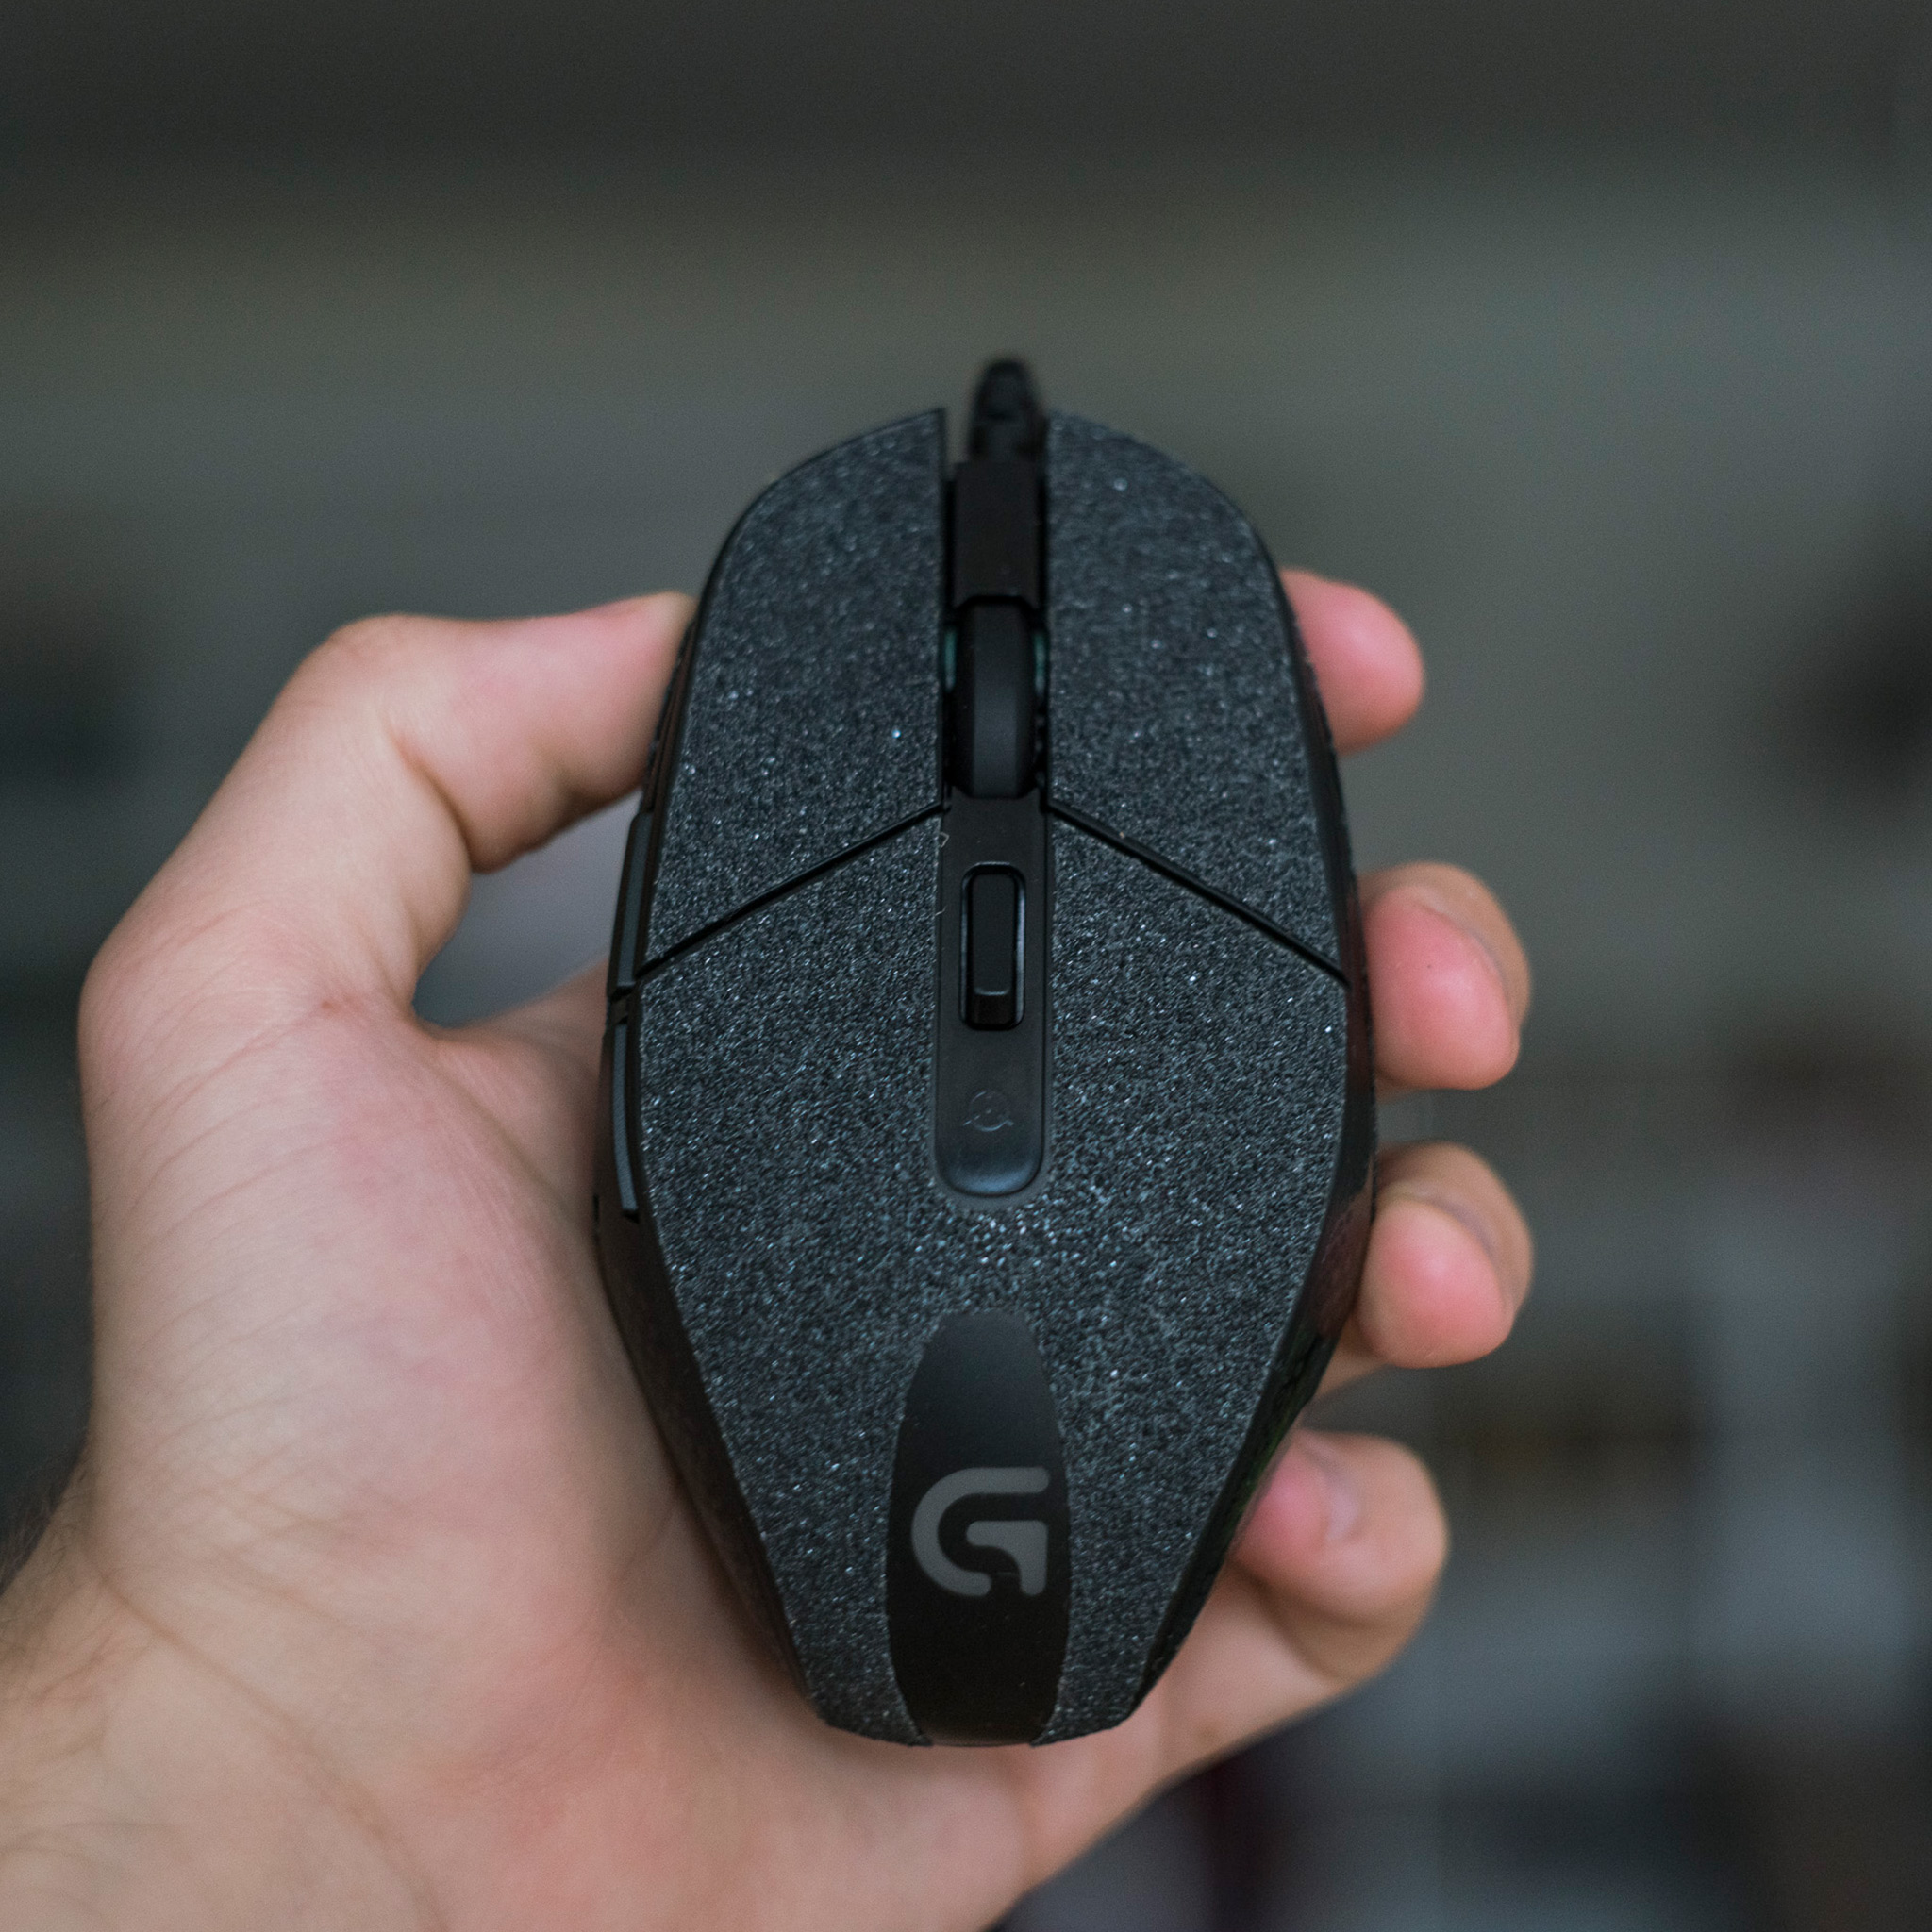 Logitech Antgrip 2015 • Antgrip your gaming mouse.